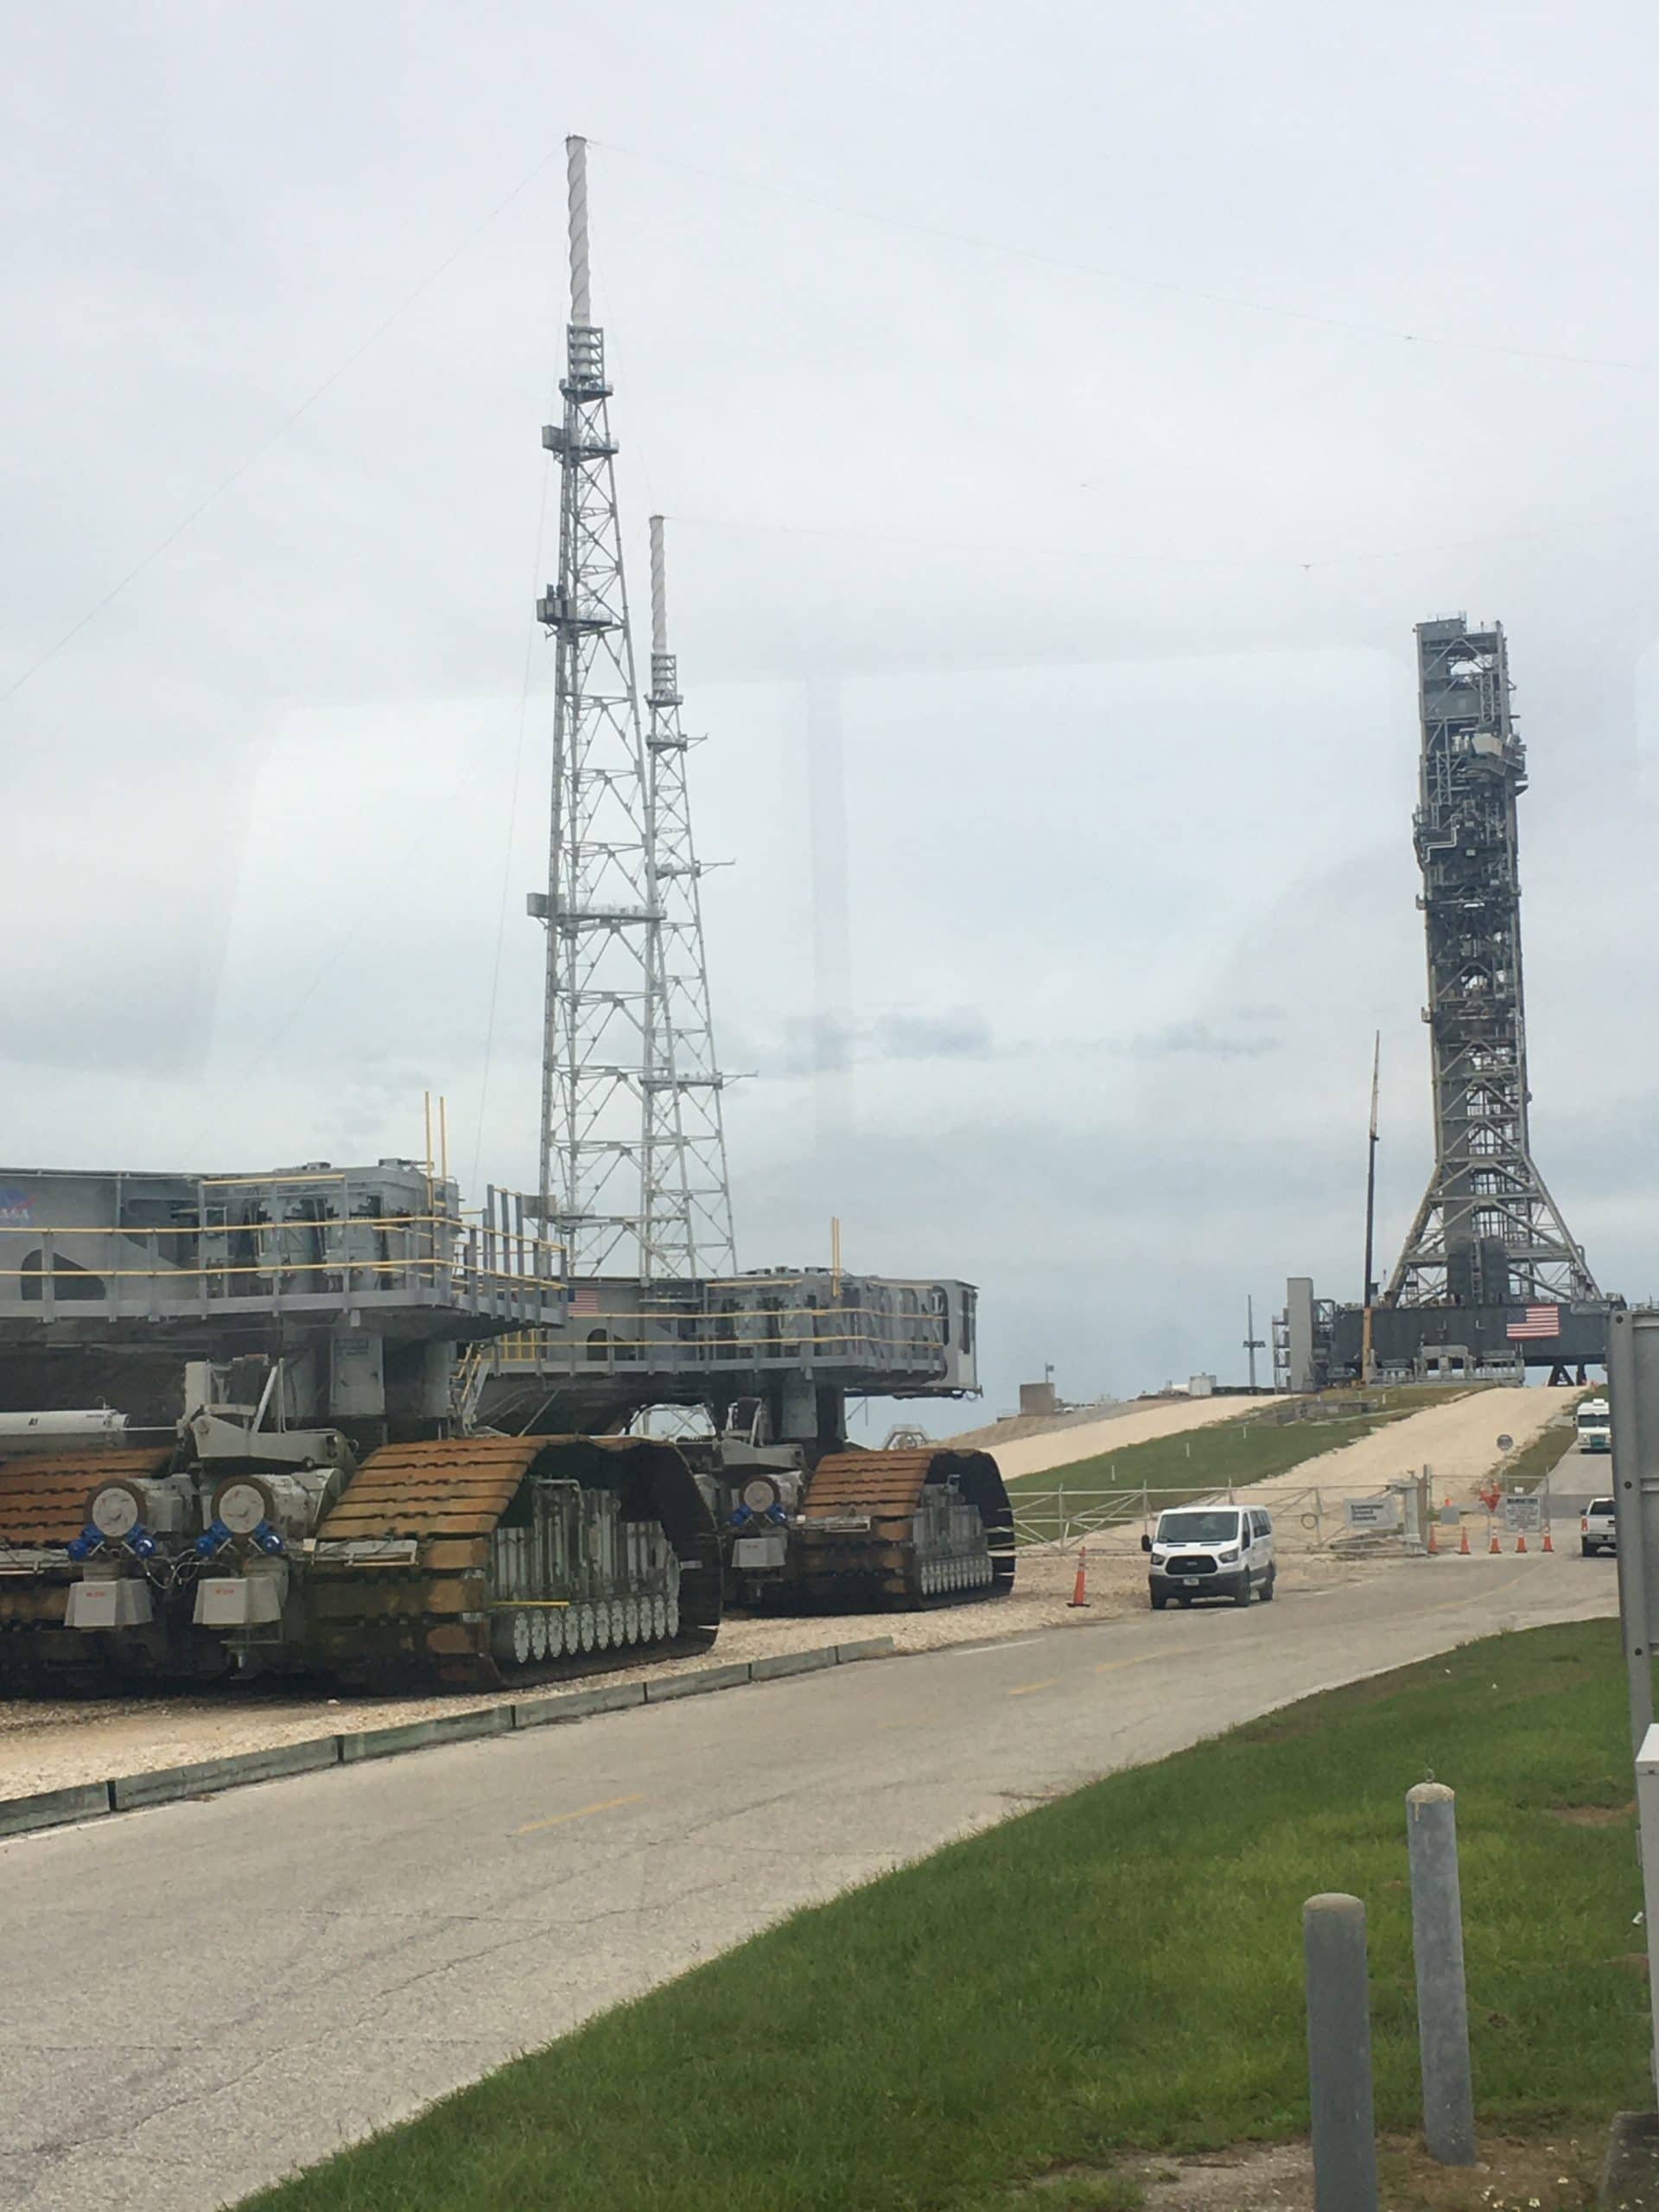 You can see the crawler they used to bring the Saturn V rockets and space shuttle to the launchpad and you might even see something on the launch pad!